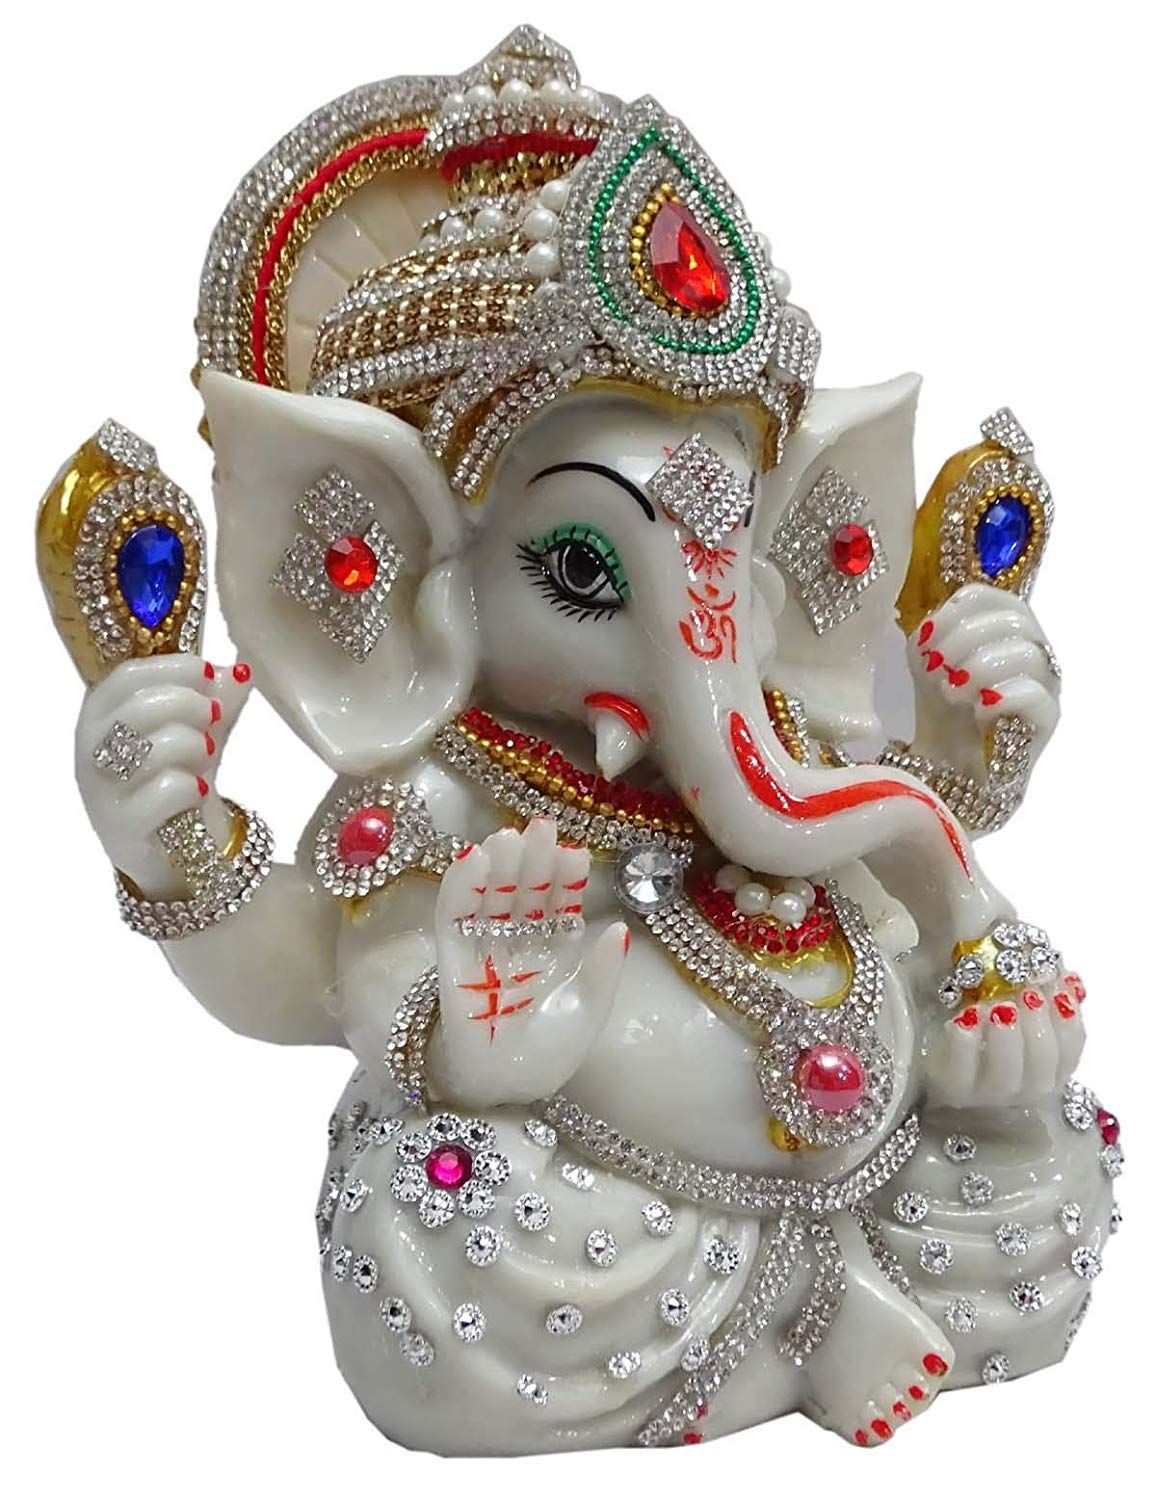 Statue ALiLA Lord Ganesha Ganapati ji Statue Idol with Ornaments for Home Temple Office Decoration & Gifting, 7 inches Height Statue